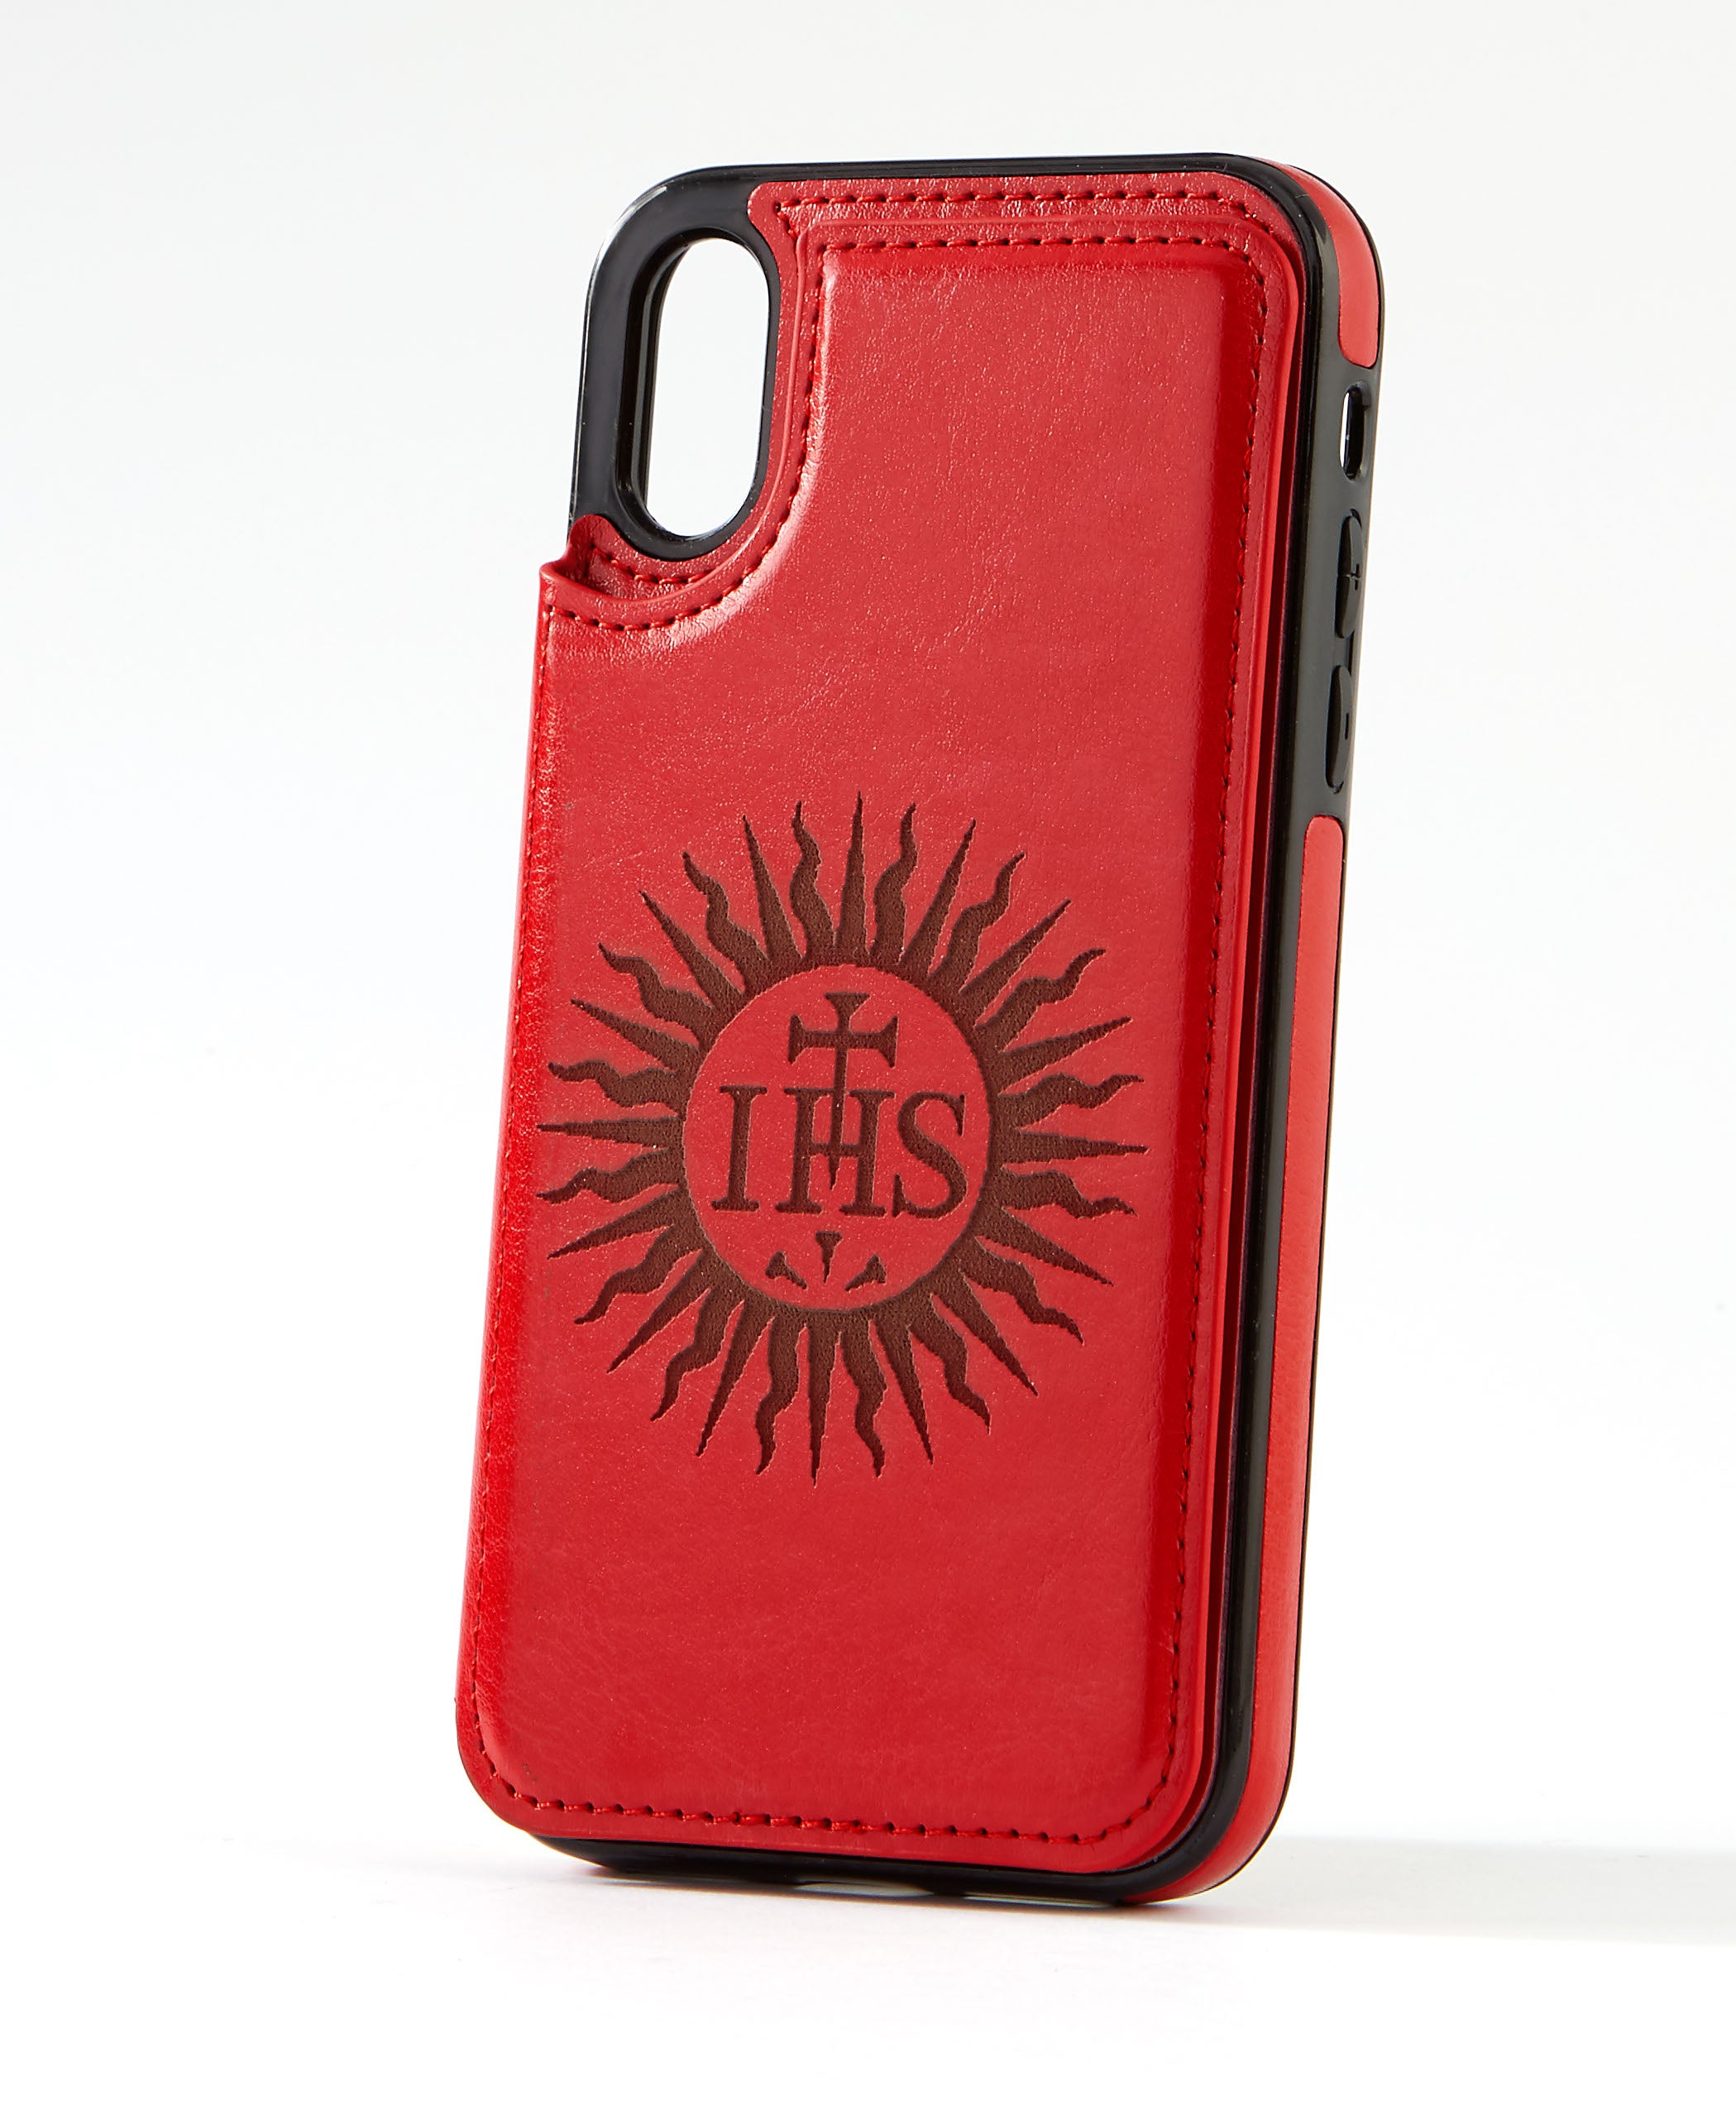 Sunburst Red Leather Wallet Case for iPhone XR